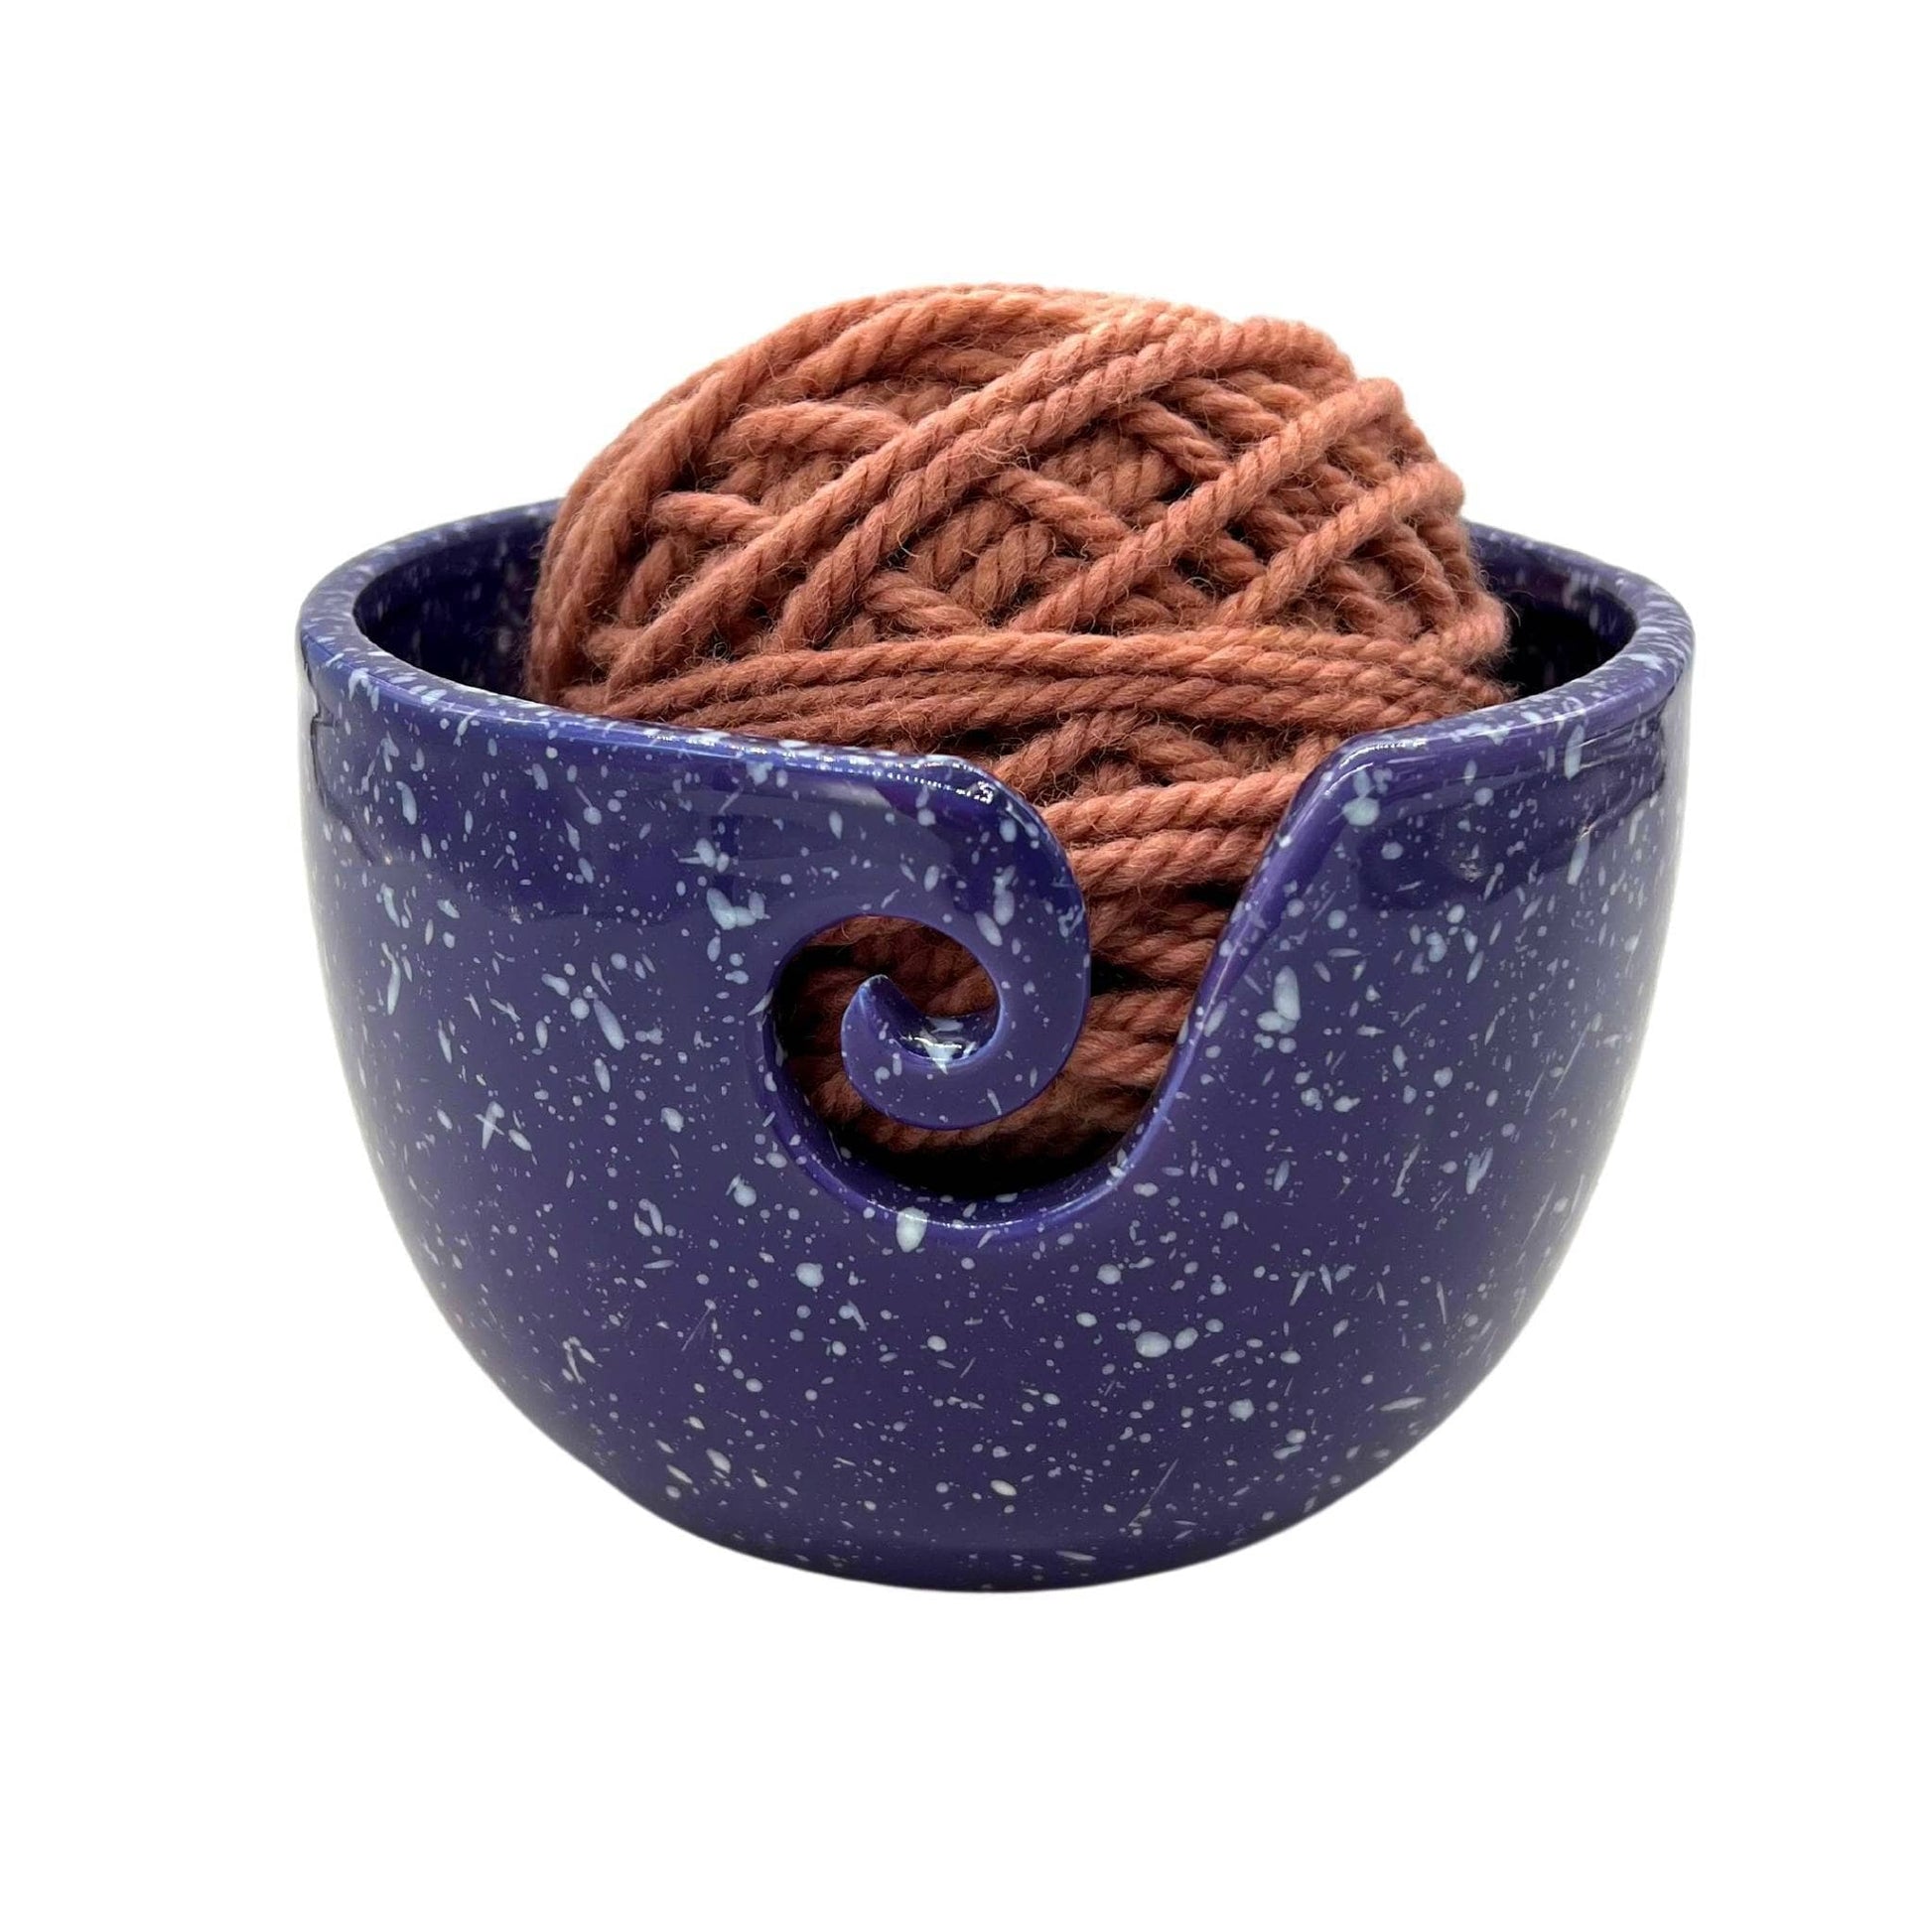 Purple with white speckled ceramic yarn bowl with salmon colored yarn inside of it on a white background